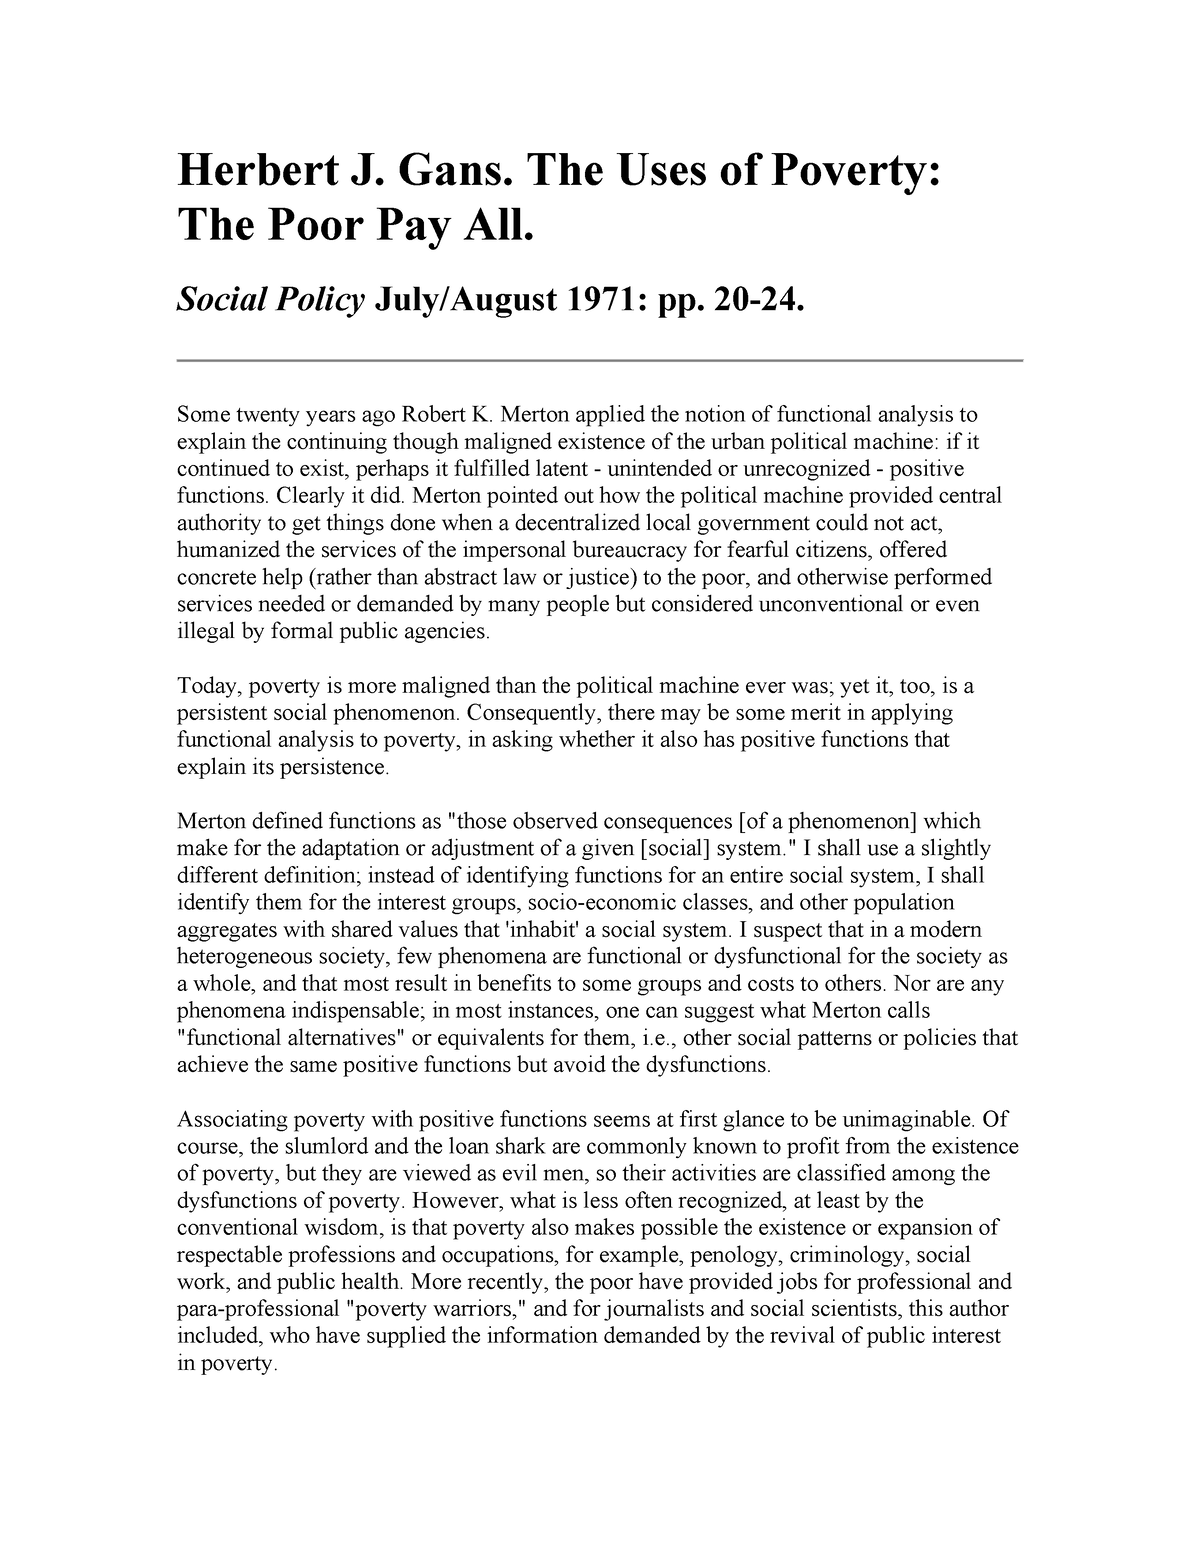 The Uses of Poverty copy - Herbert J. Gans. The Uses of Poverty: The ...